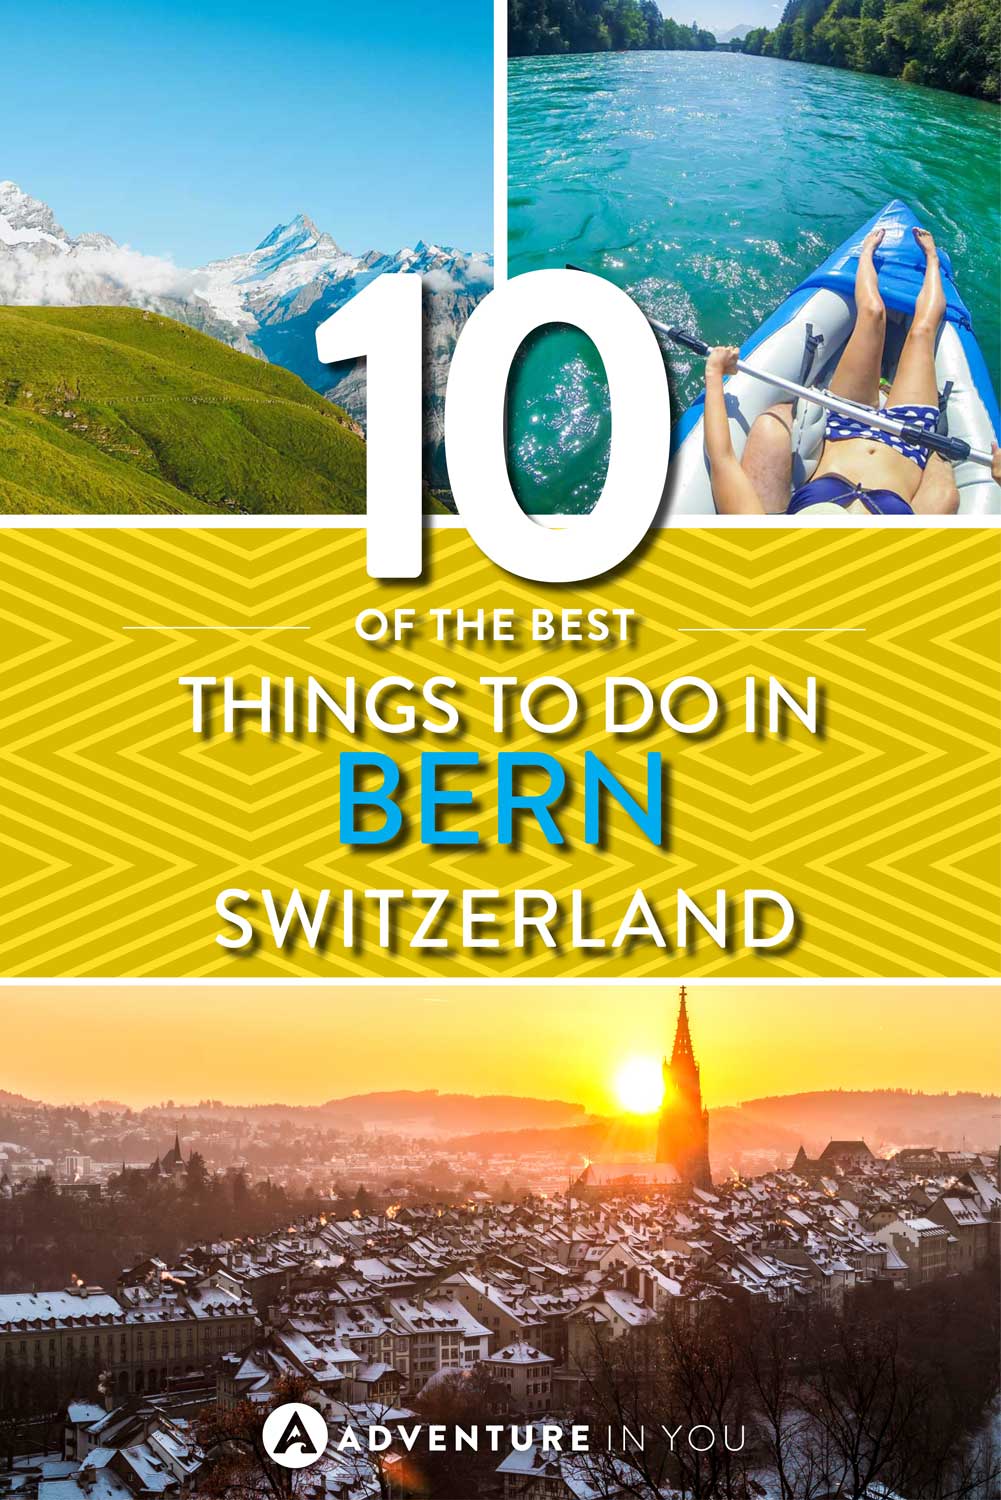 Bern Switzerland | Looking for things to do in Bern? Check out our full post on the best things to do in this beautiful city. From climbing mountains to going on day trips, Bern is full of many awesome sights.